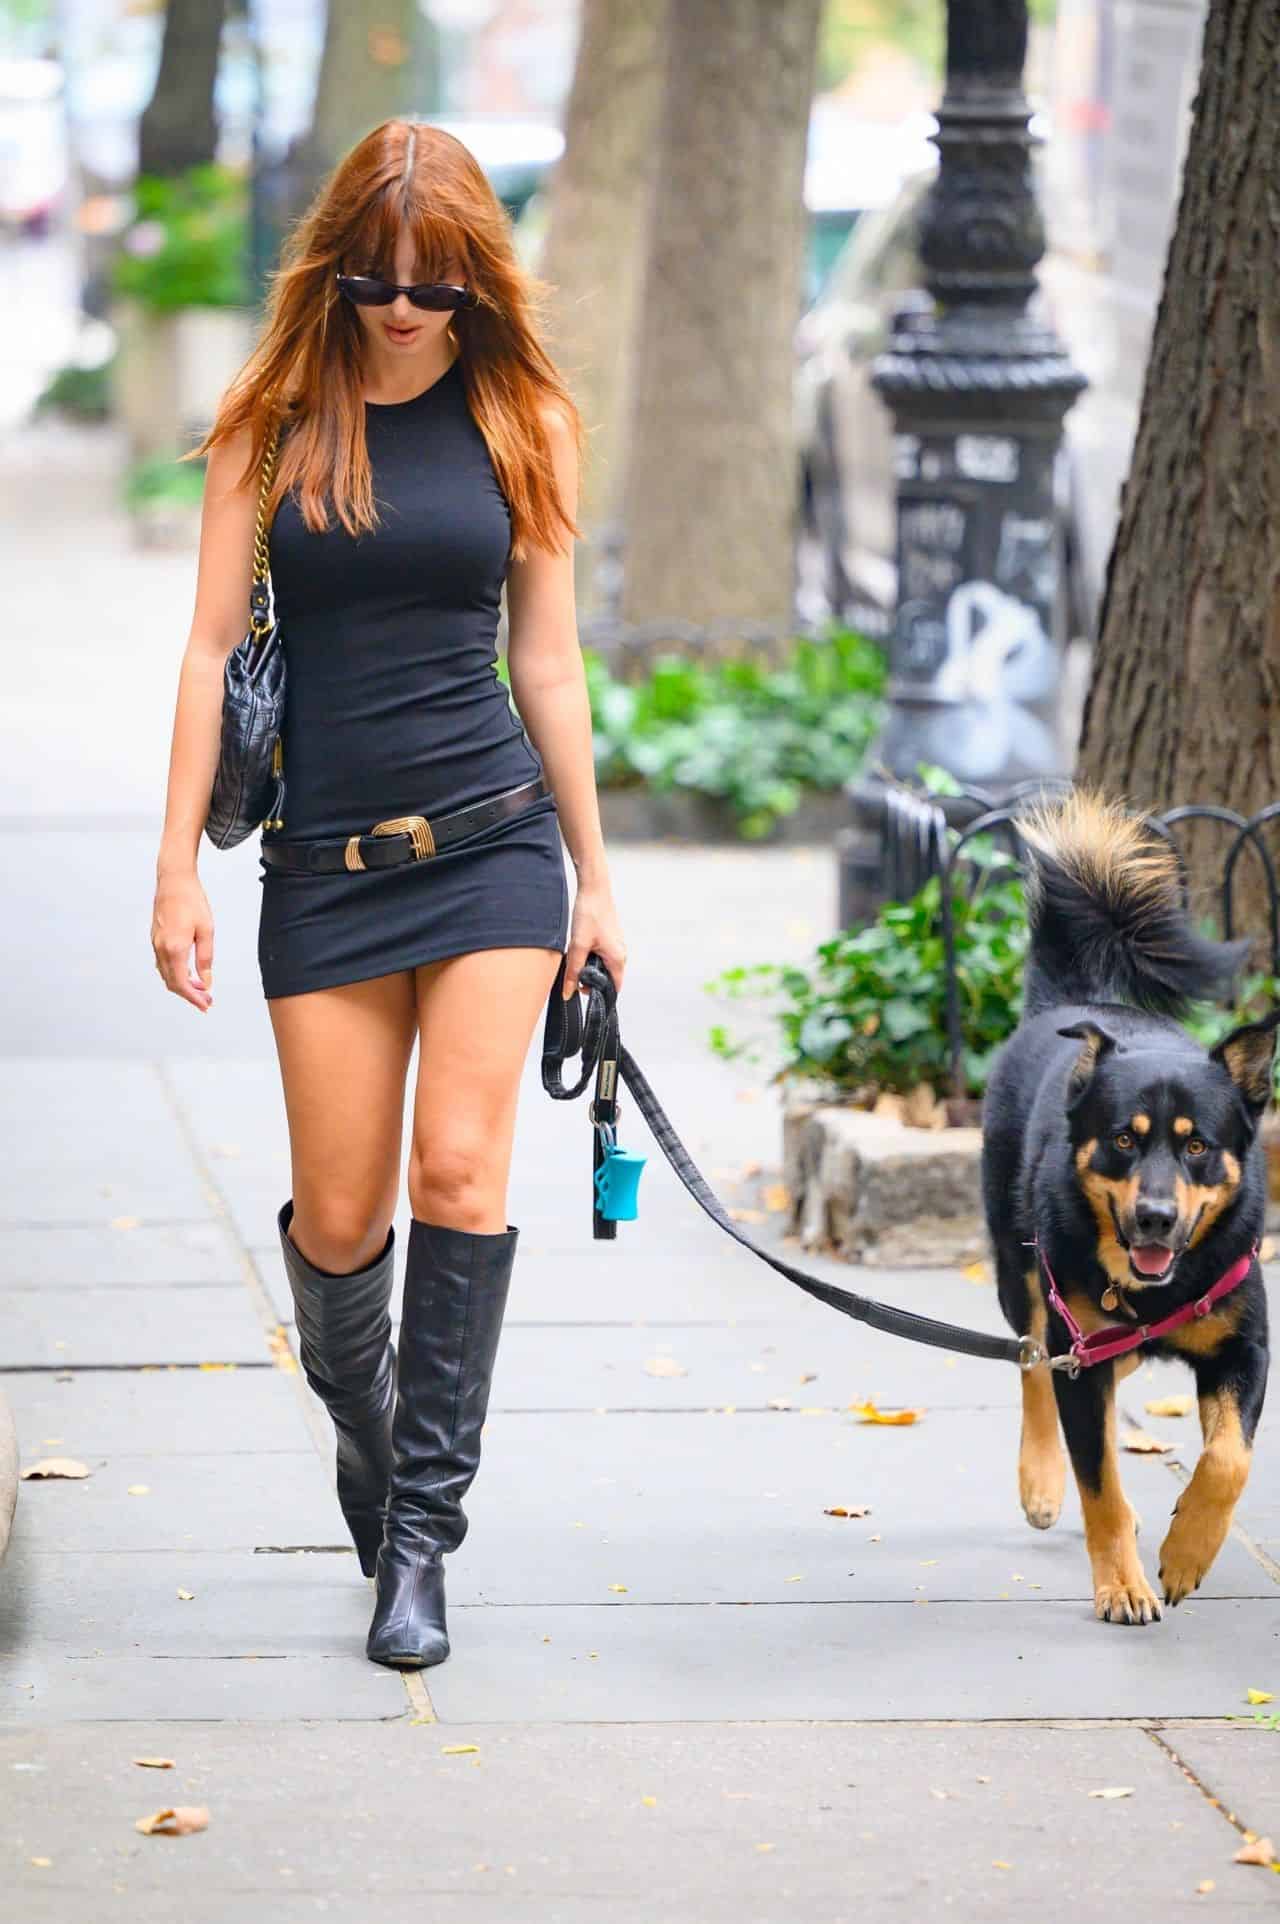 Emily Ratajkowski Shows Off Legs in To-the-Knee Boots While Walking Dog